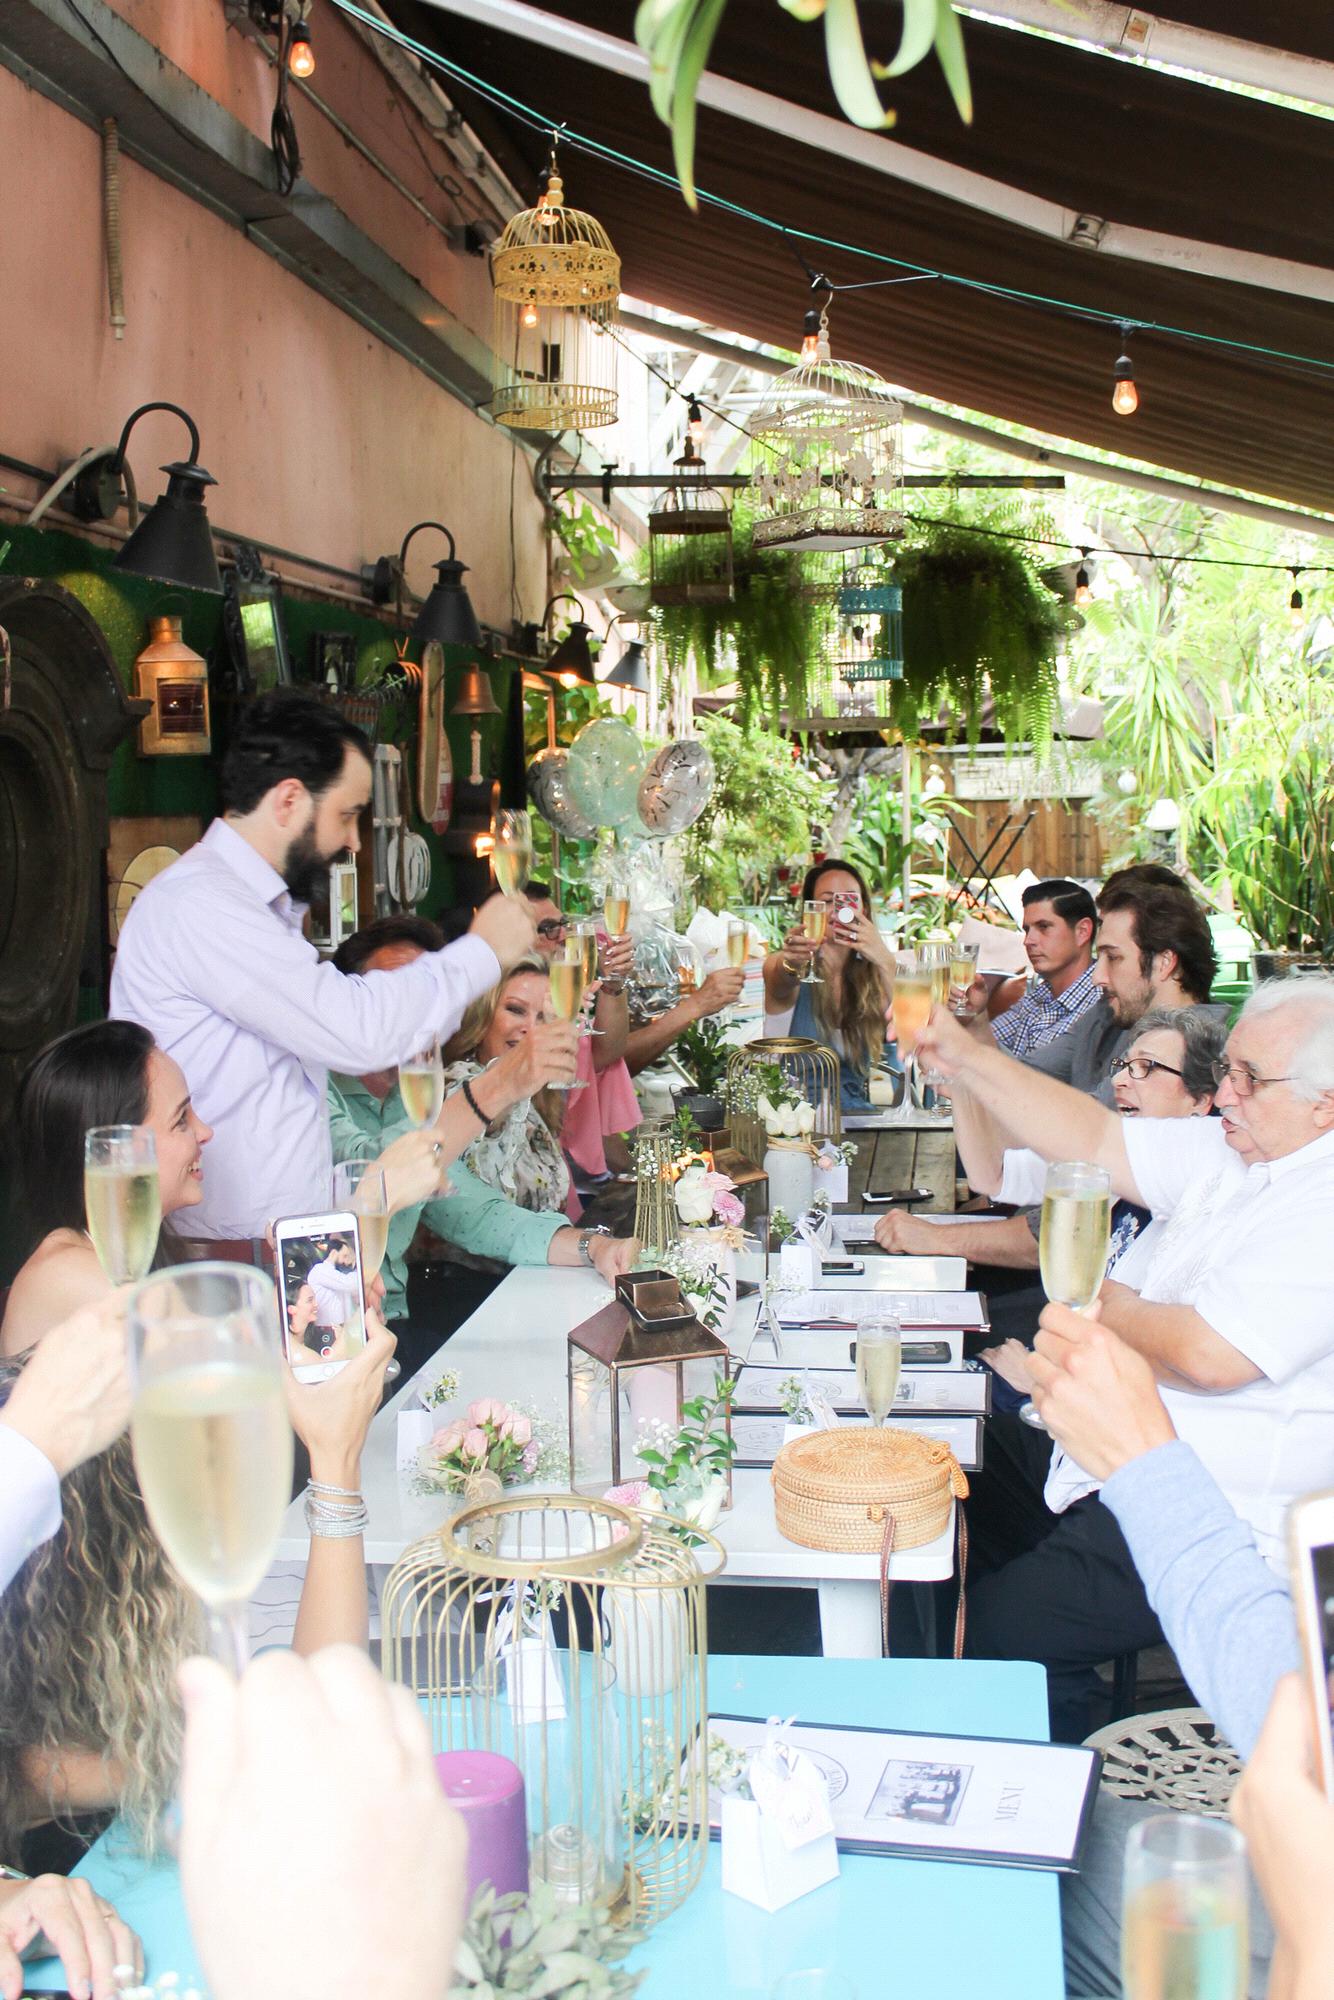 Celso's toast post engagement and my announcement that the wedding would be Nov 2, 2019 - NO TIME TO WASTE!!!